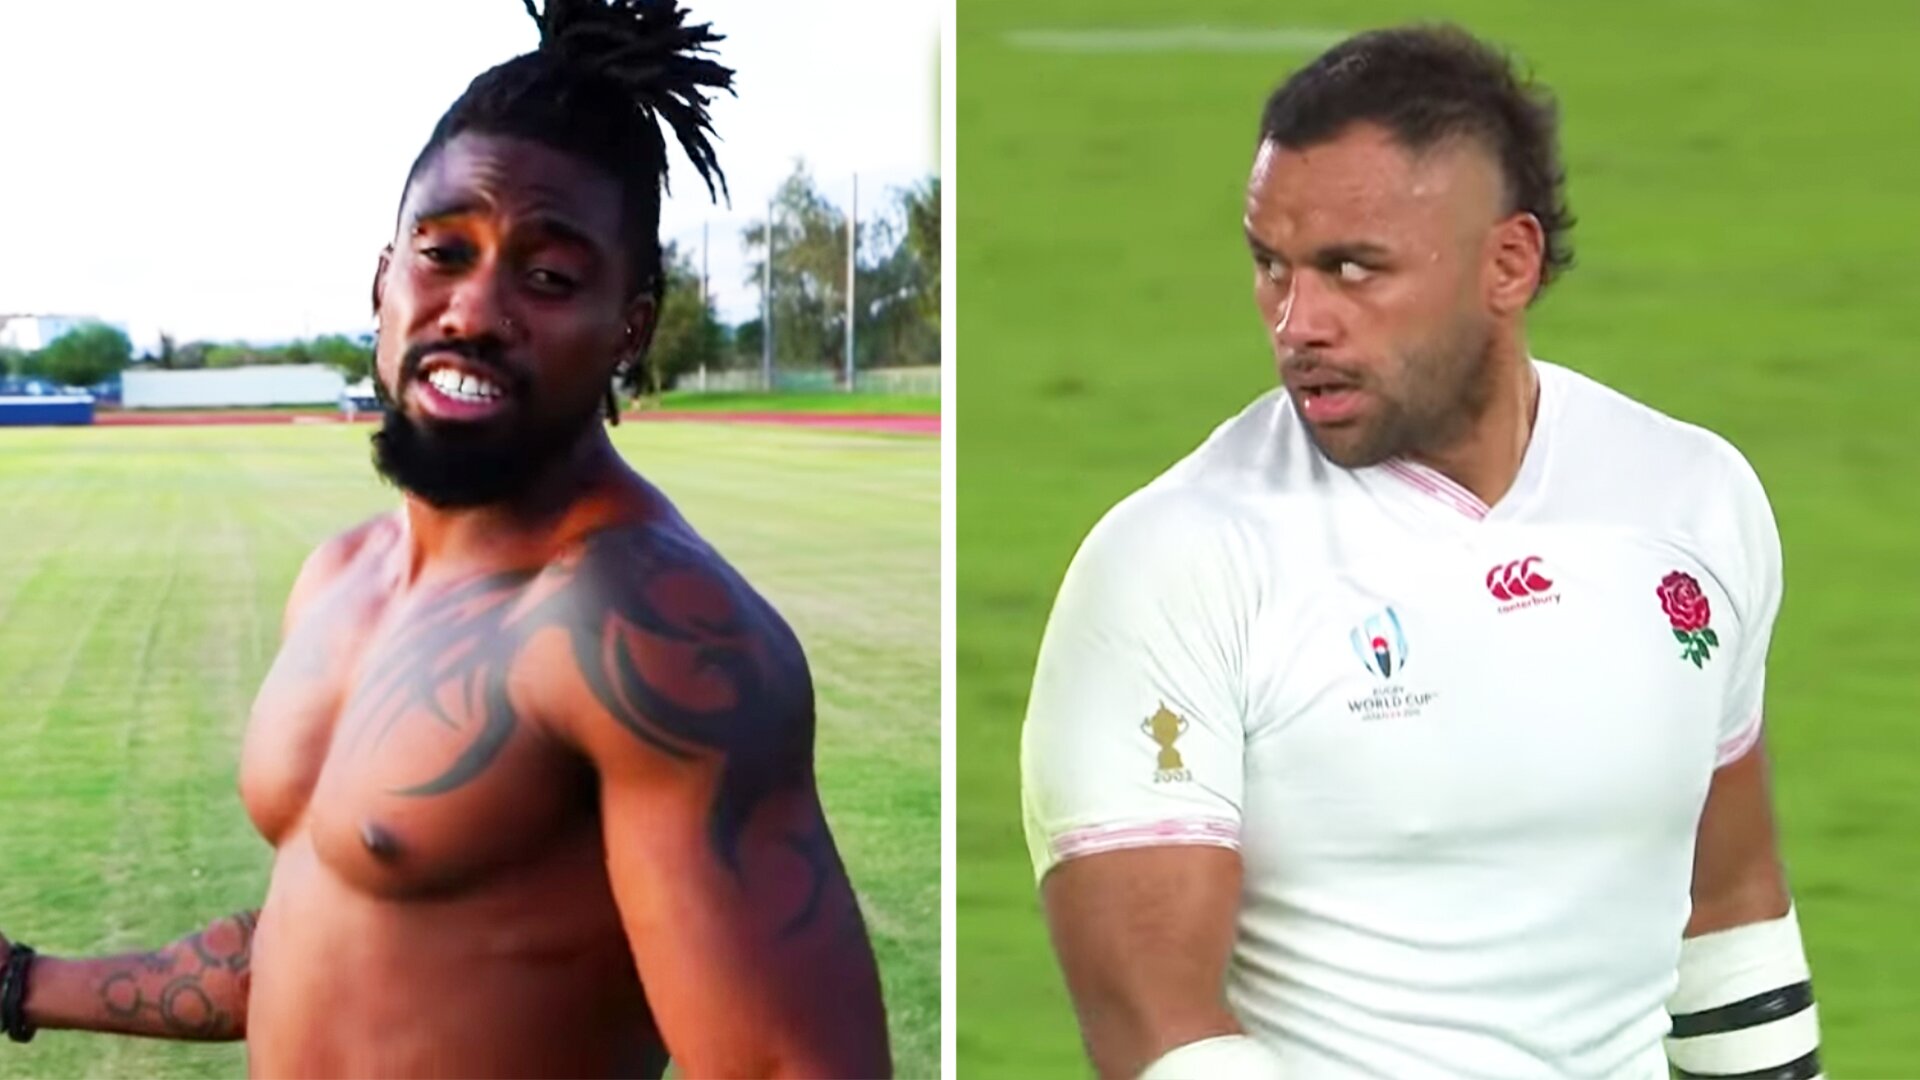 Rugby stars react to NFL players tweet claiming he could dominate rugby easily